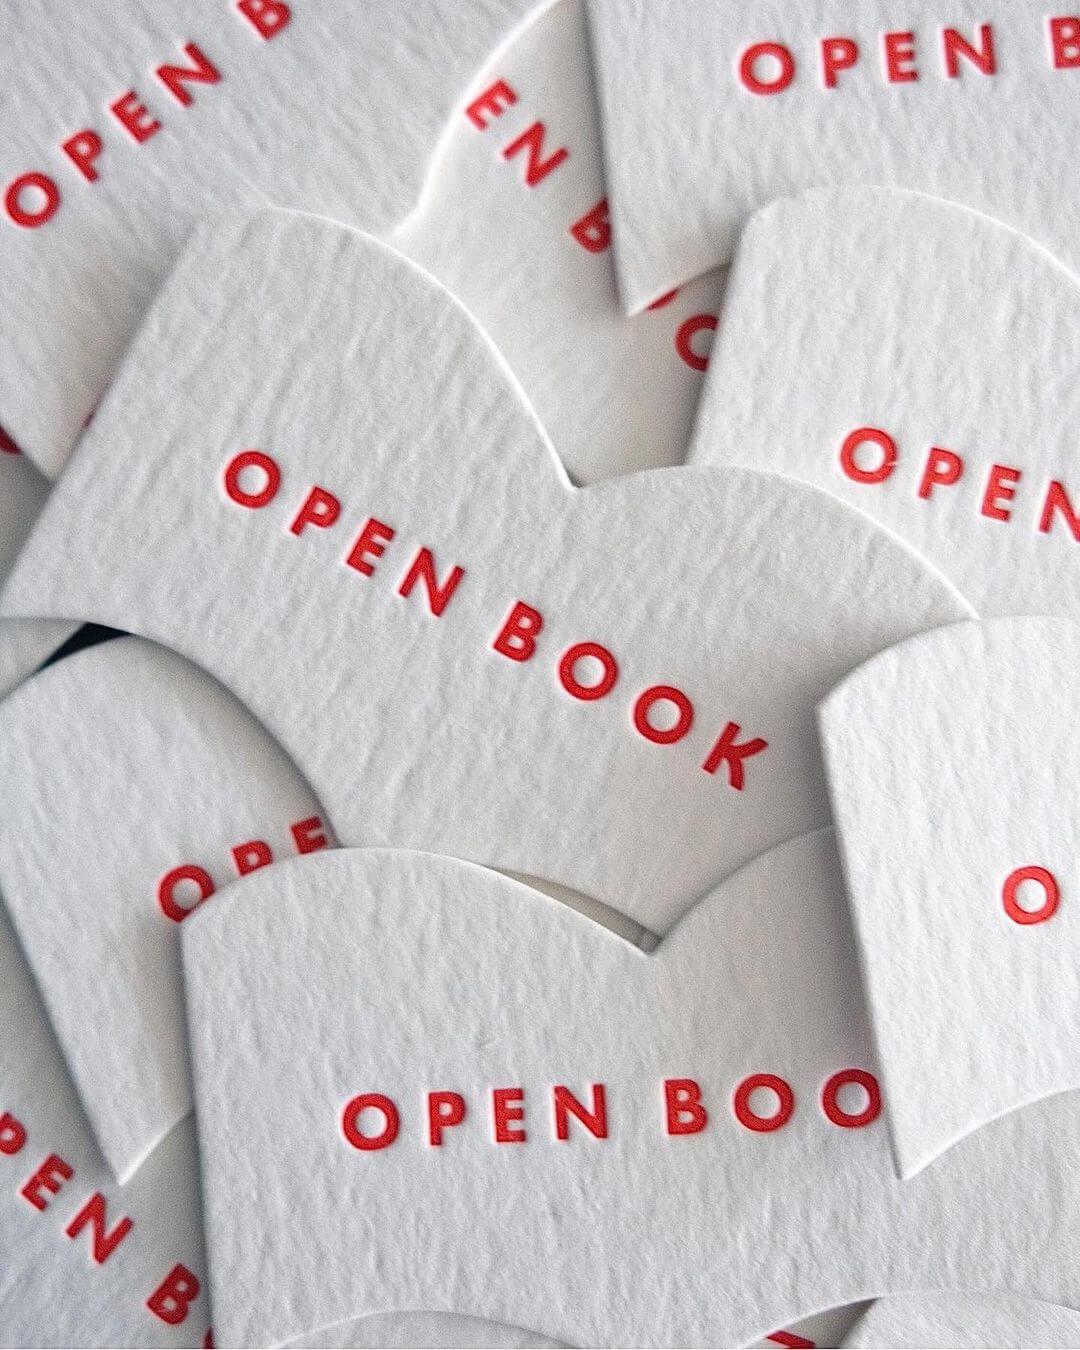 book shaped business cards by bright press